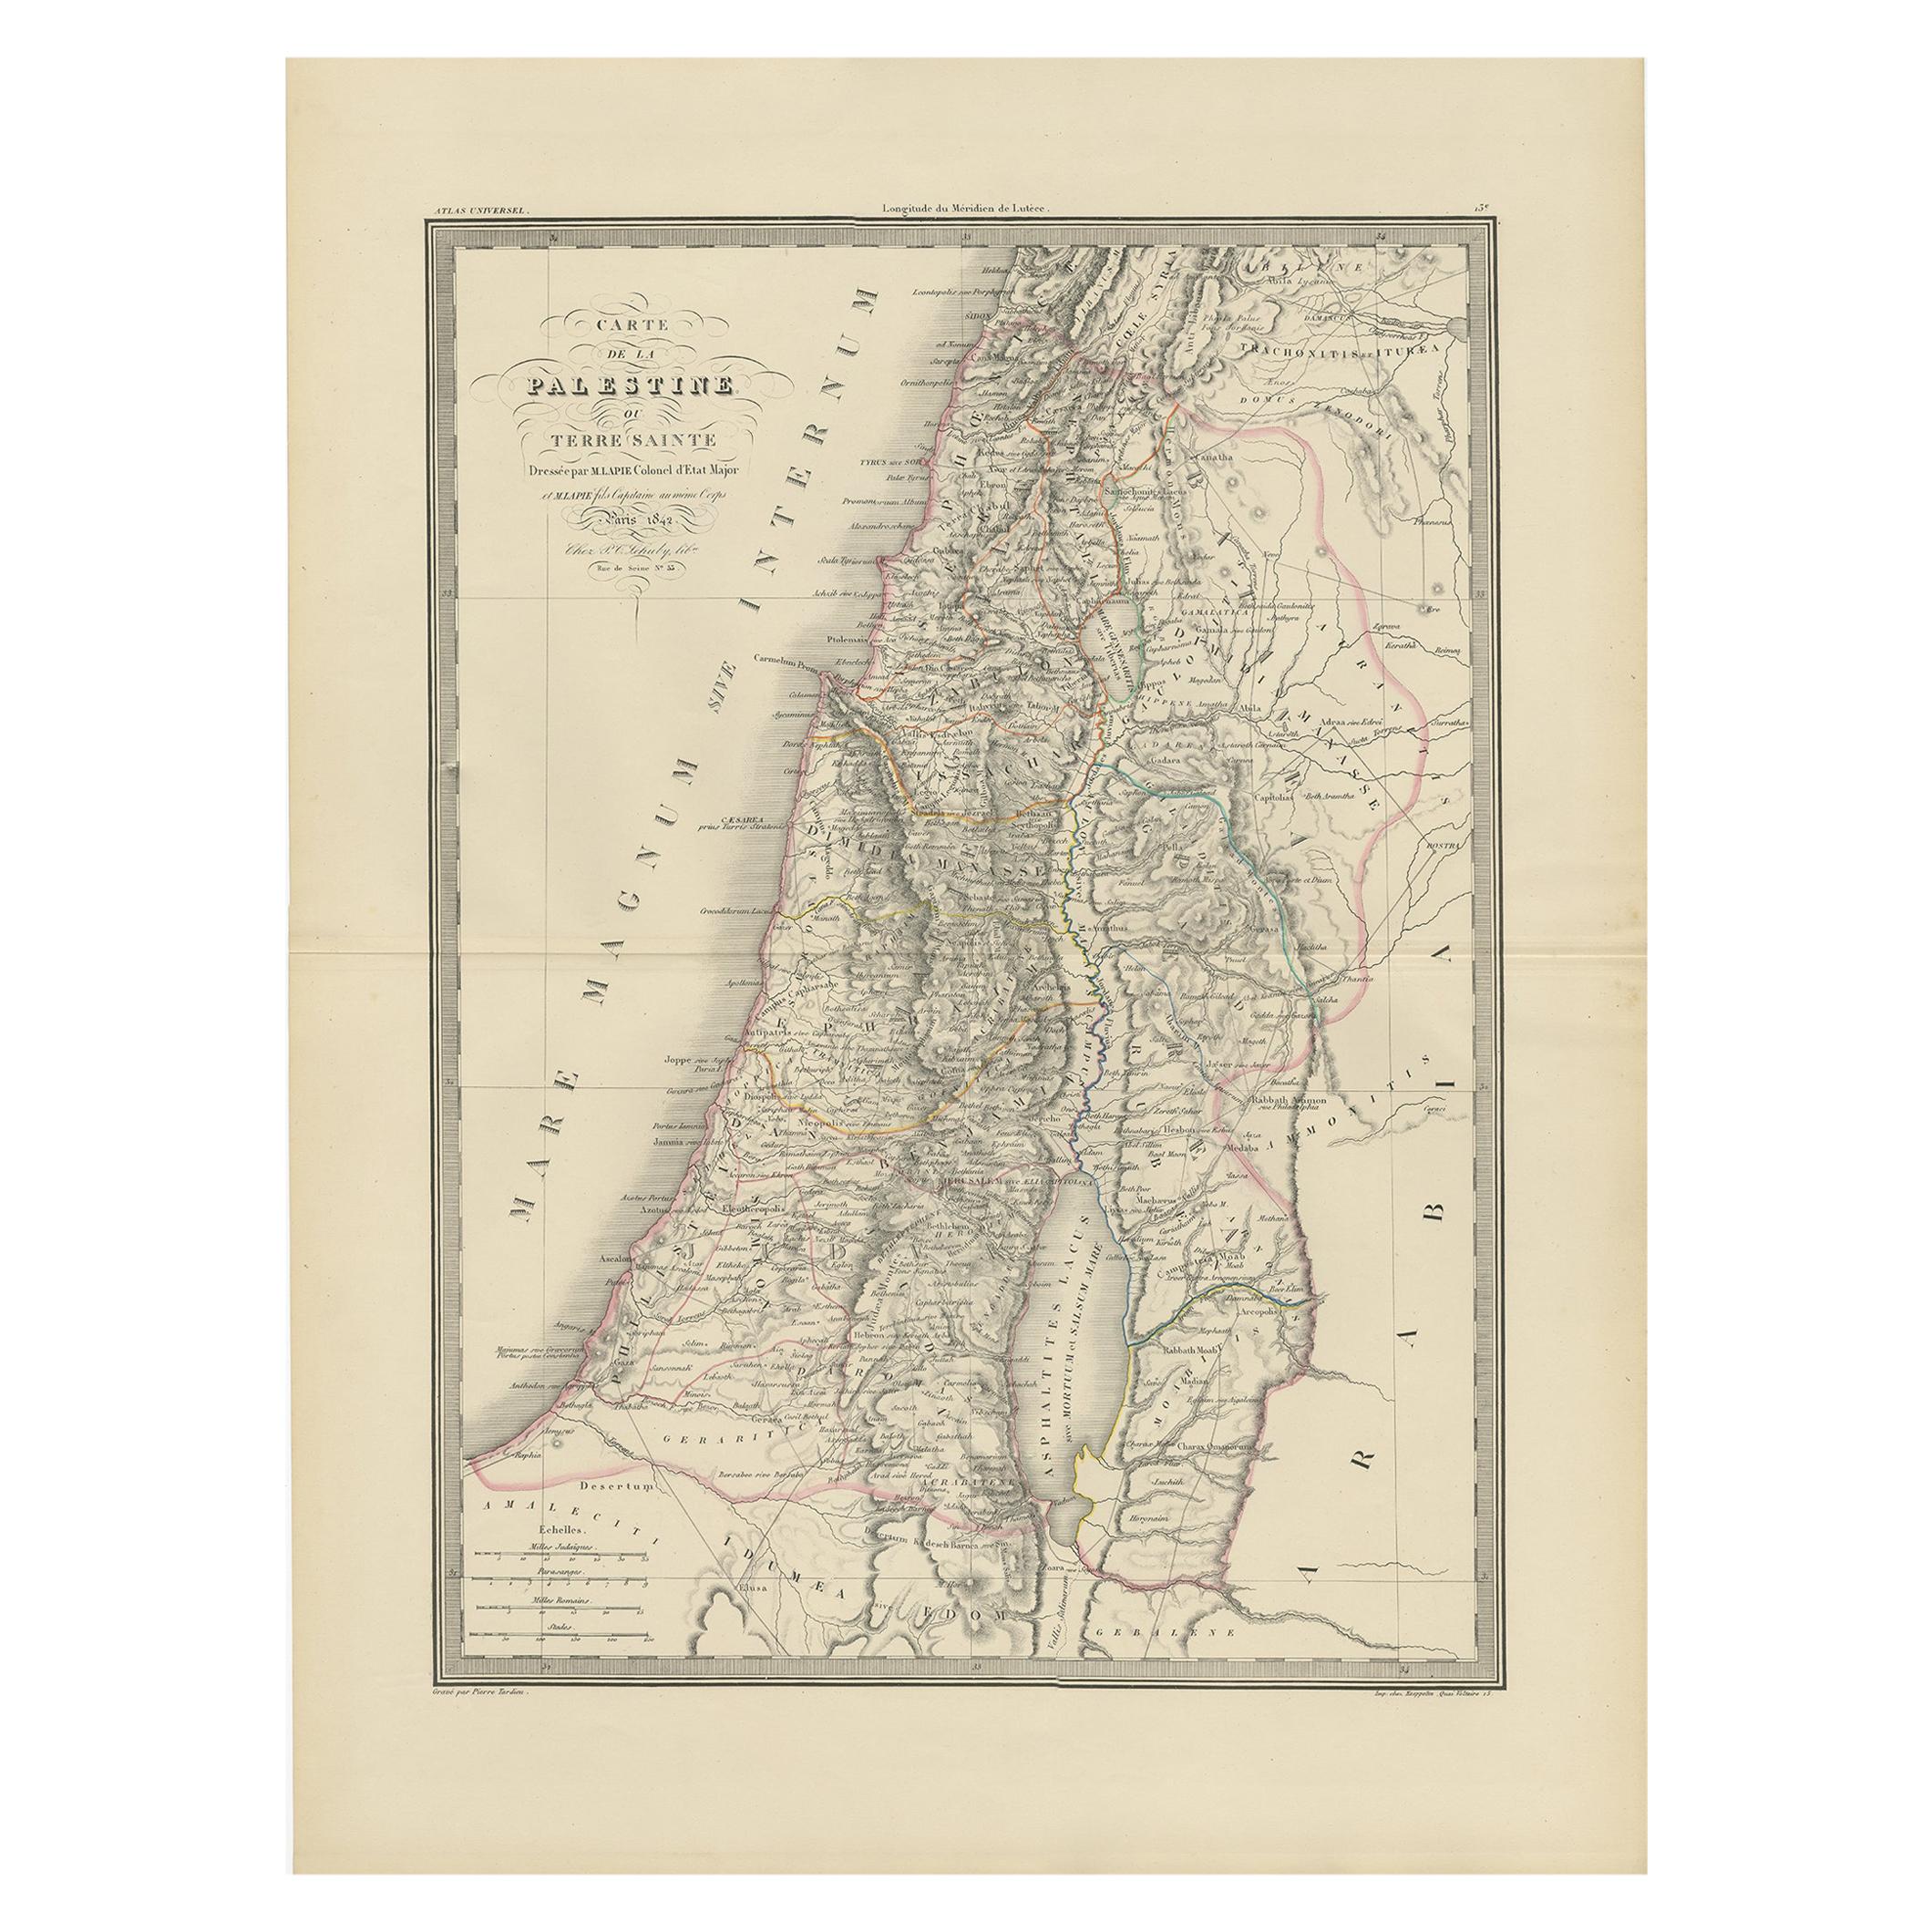 Antique Map of Palestine by Lapie, 1842